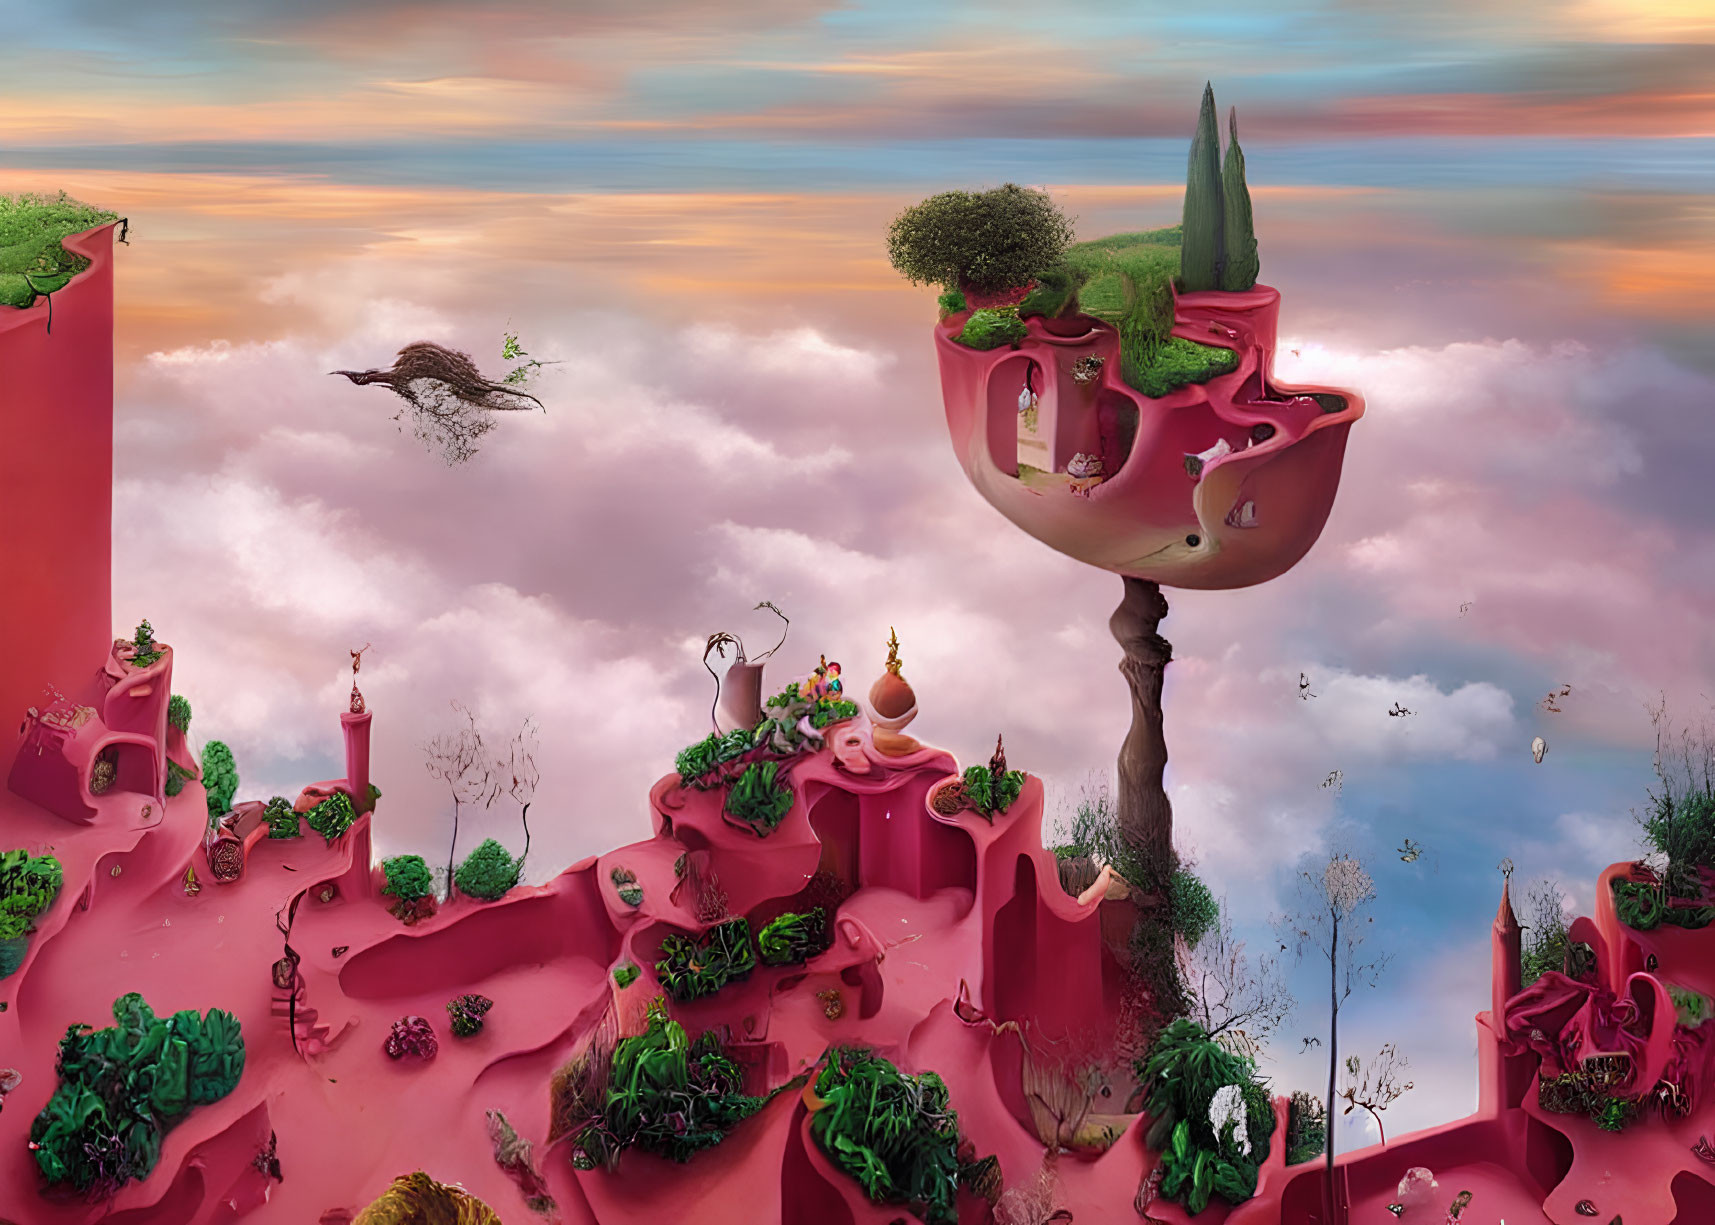 Fantasy surreal landscape with red terrain, floating islands, lush vegetation, and cloudy sky